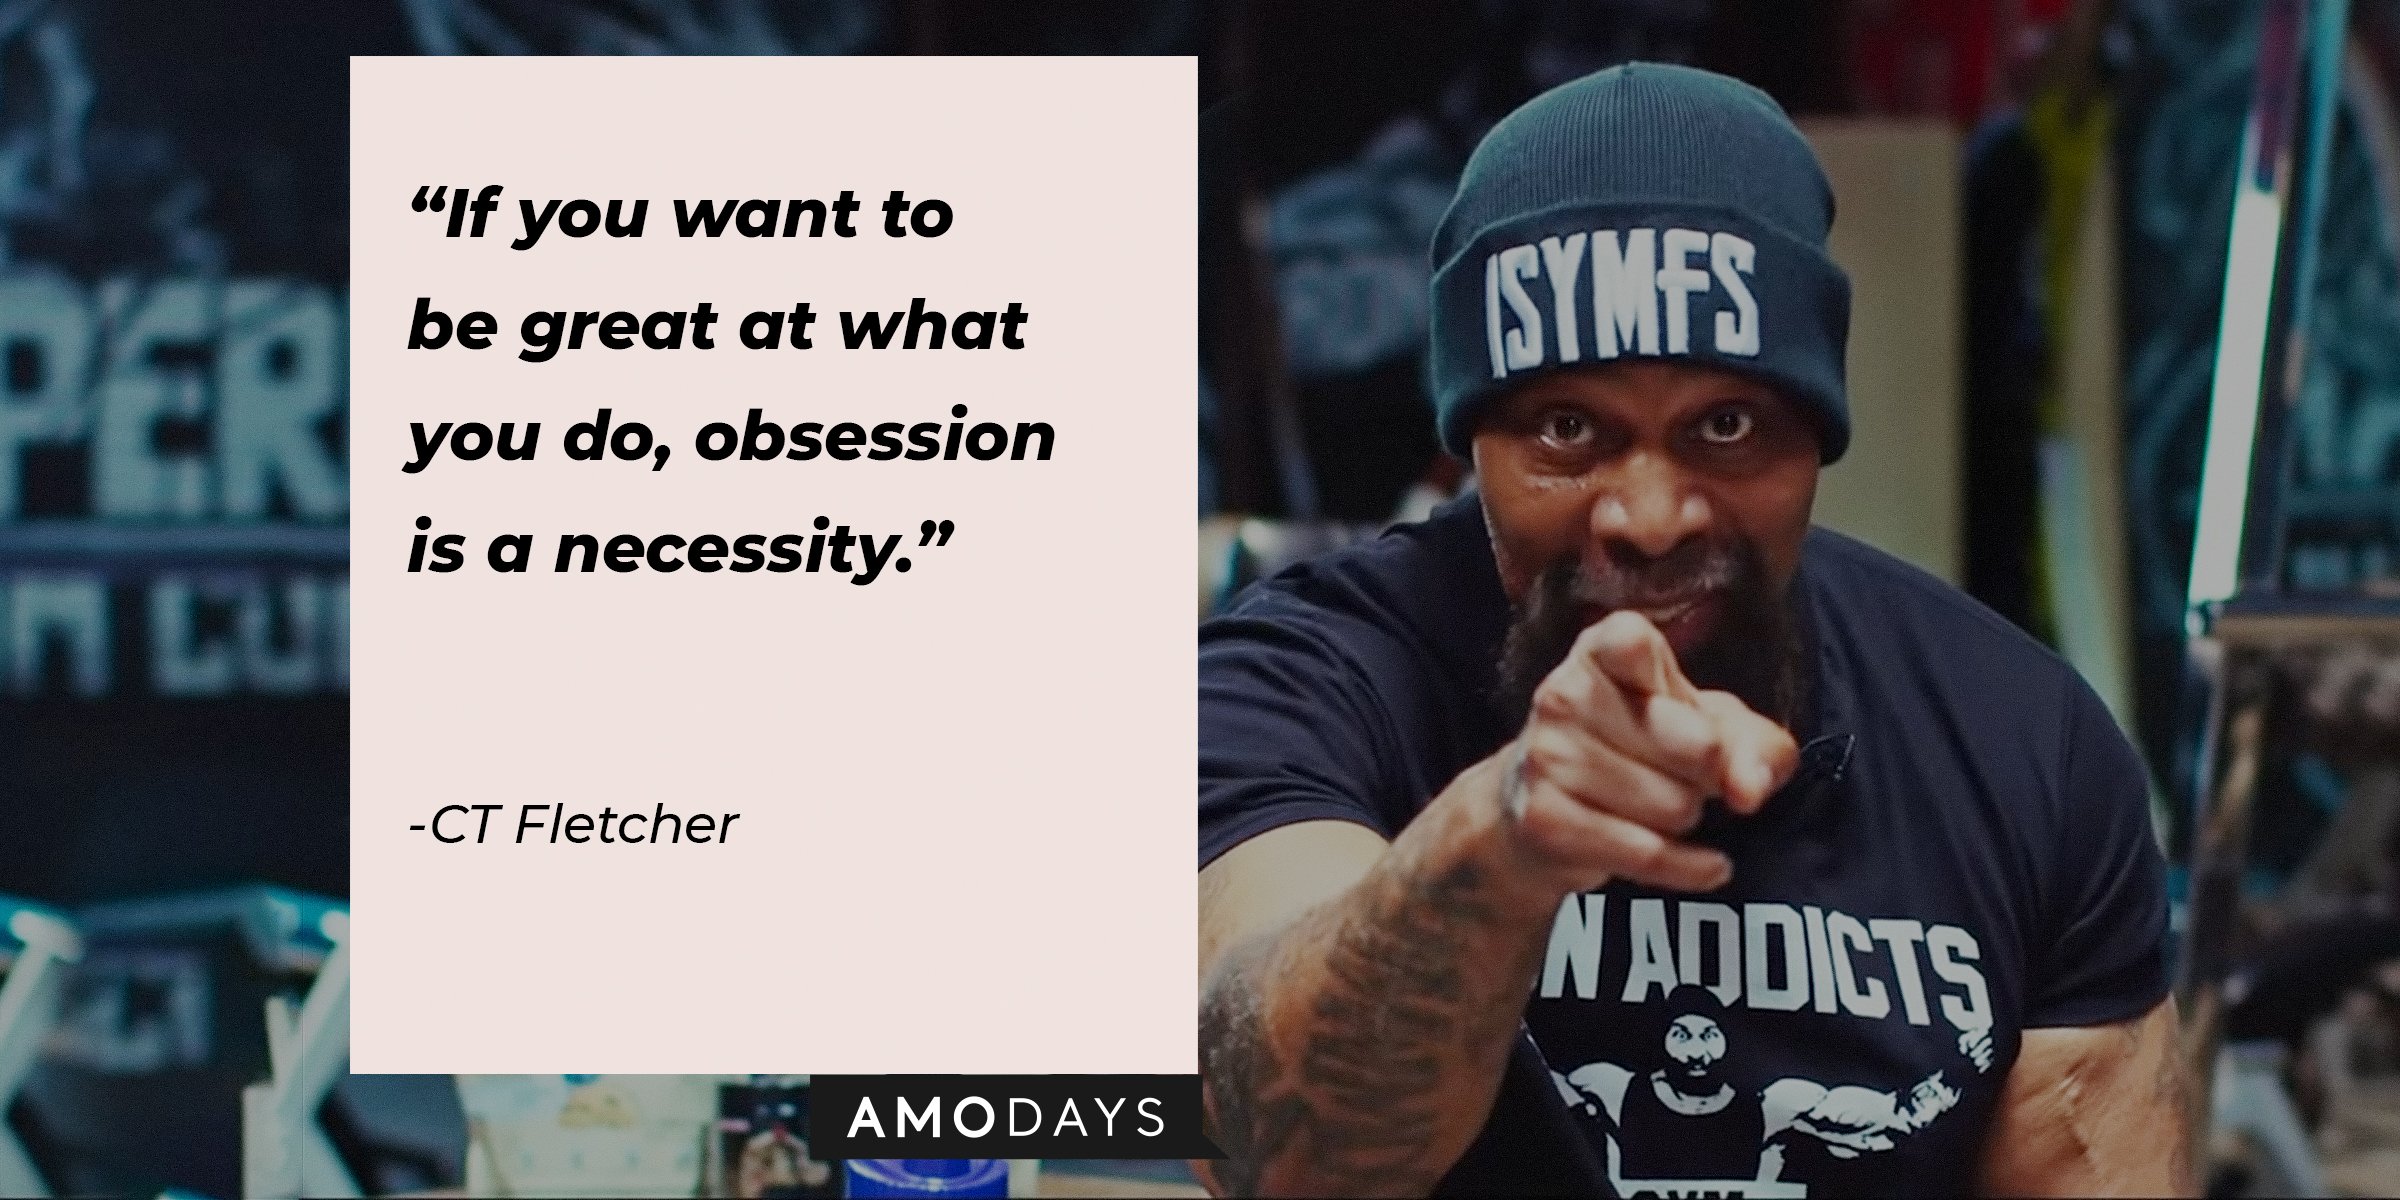 Source: Youtube.com/CT Fletcher Motivation | CT Fletcher with the quote: "If you want to be great at what you do, obsession is a necessity."